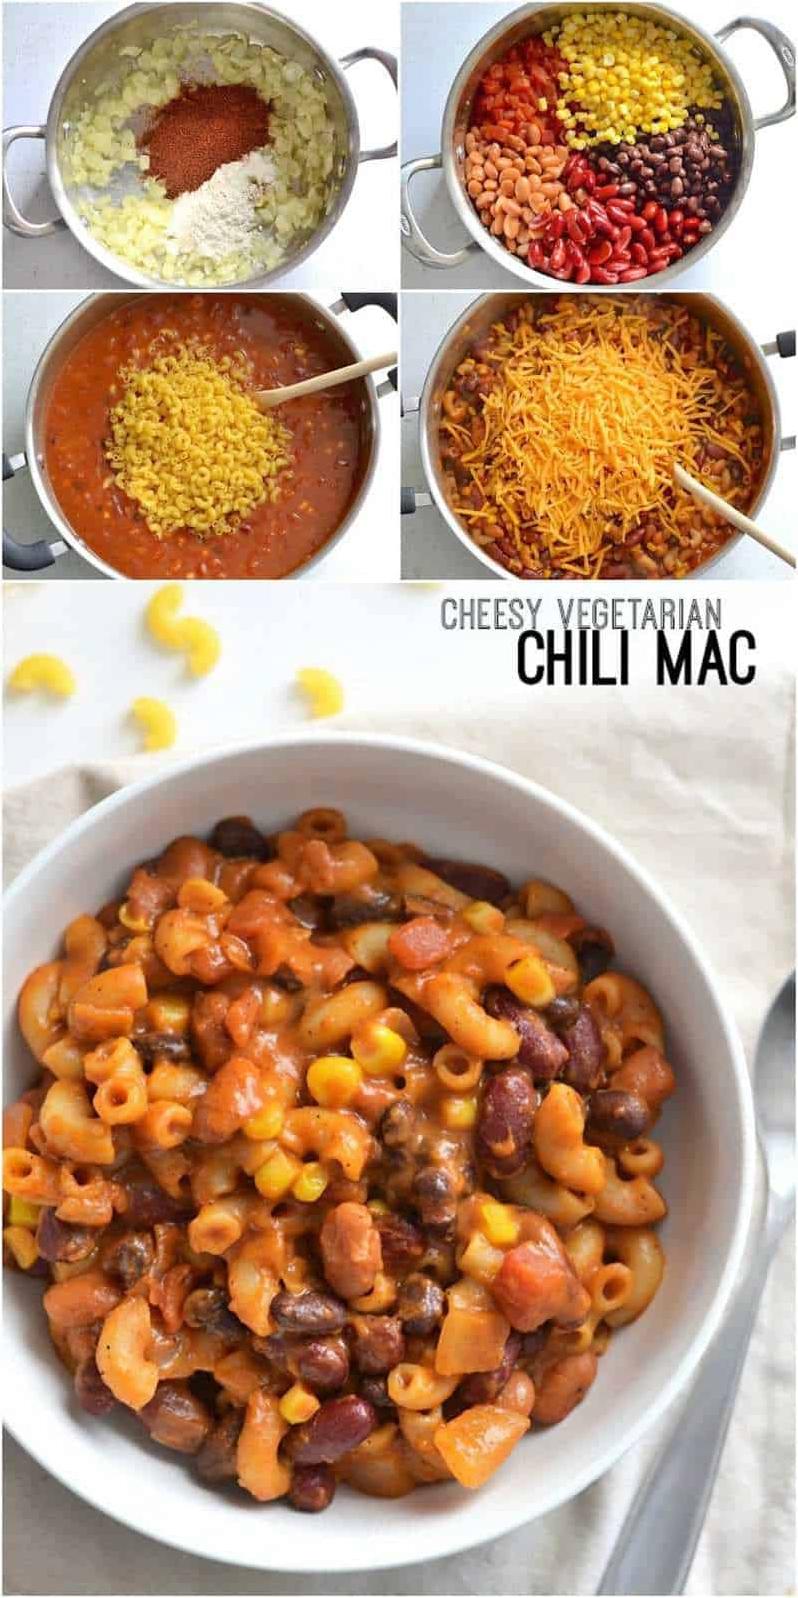  A delicious and easy alternative to traditional chili.